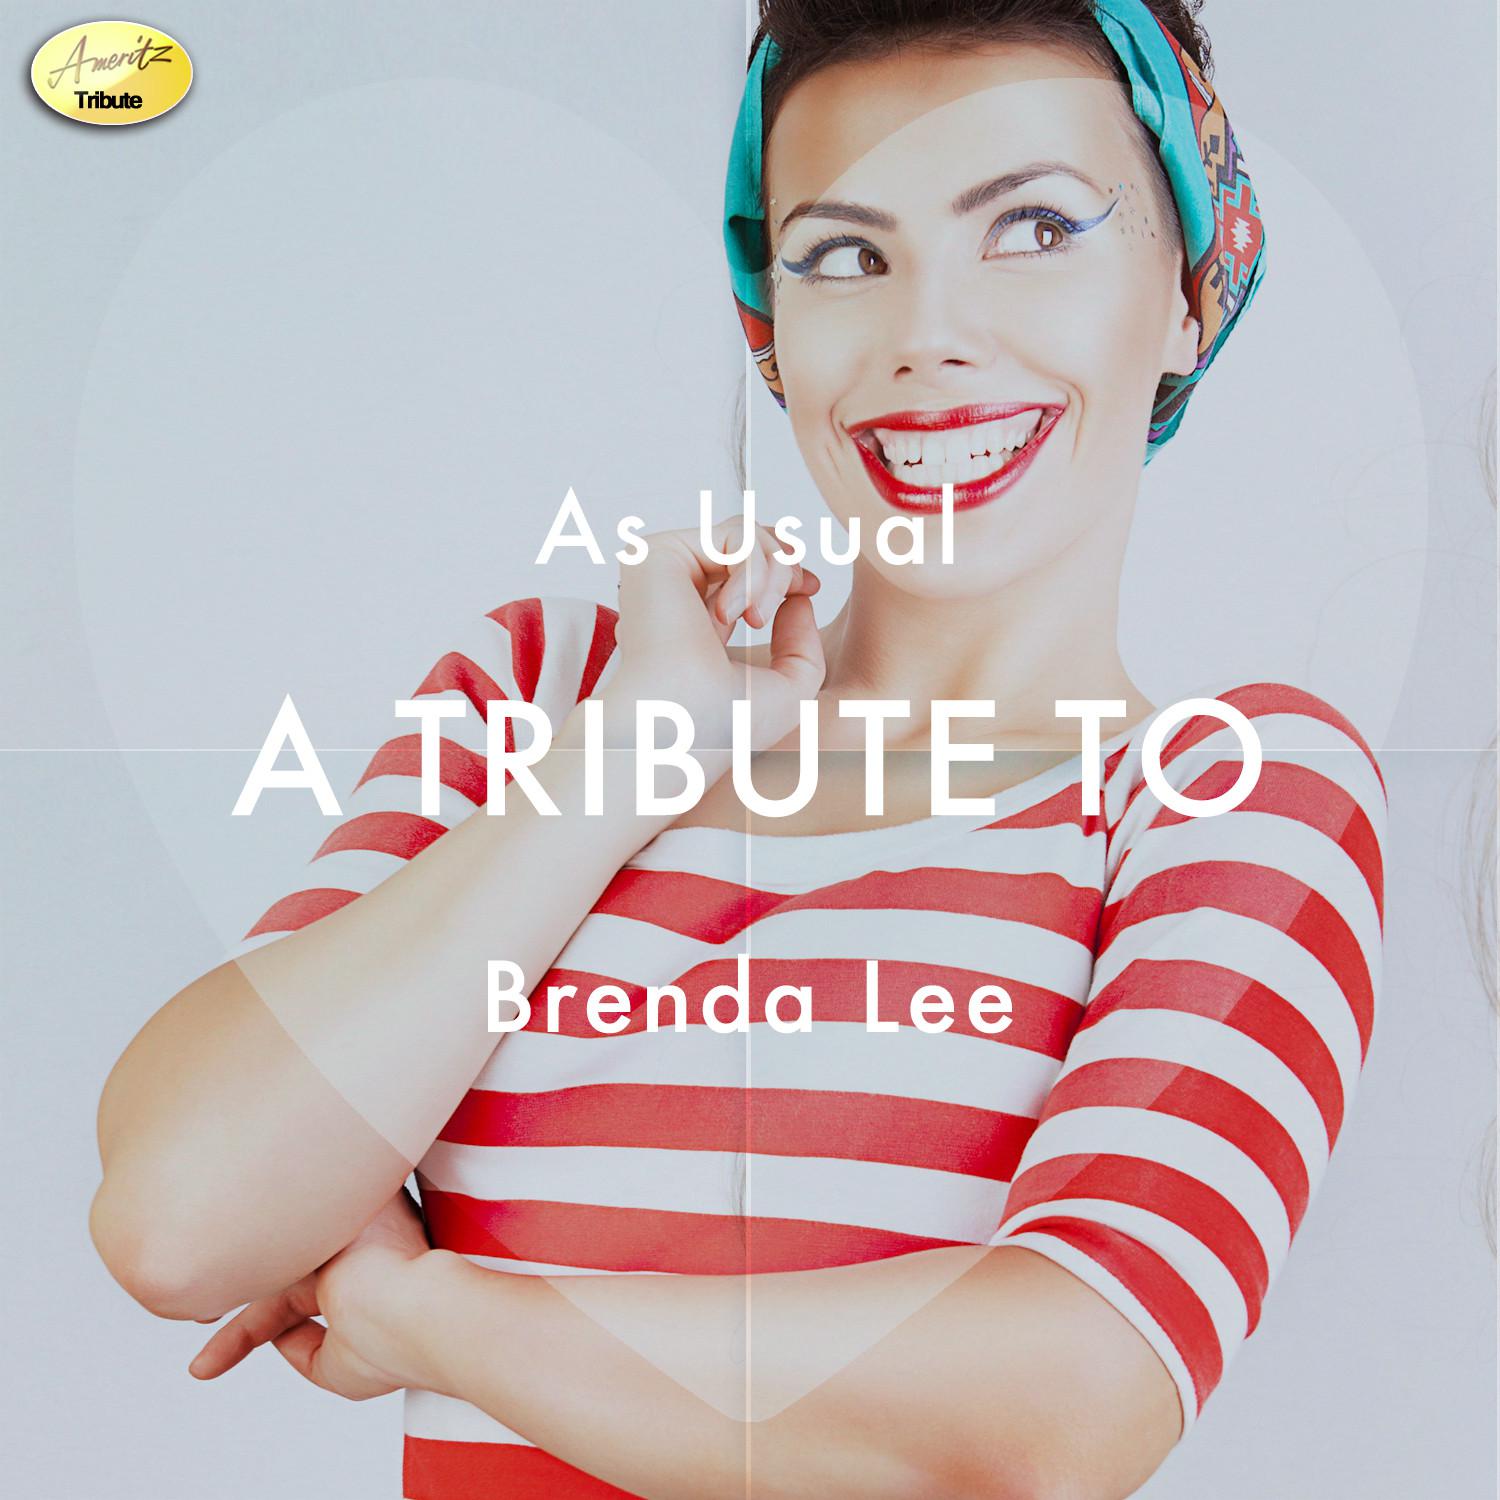 As Usual - A Tribute to Brenda Lee